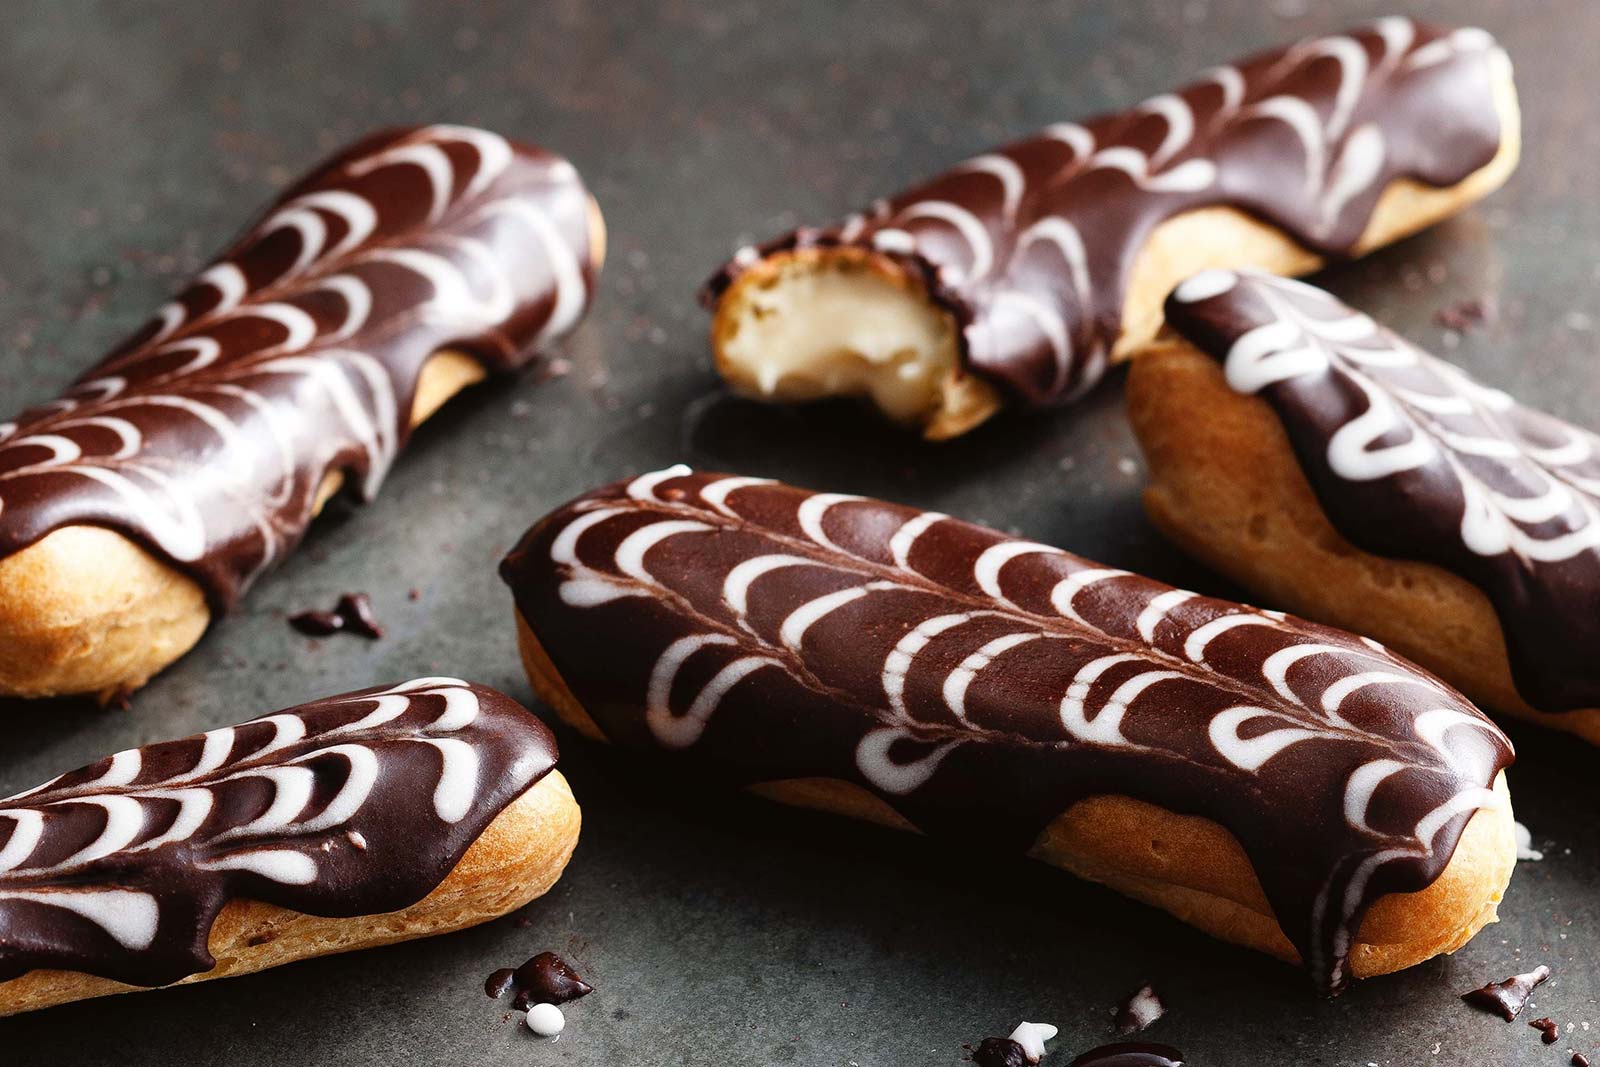 🍫 We Know Whether You’re an Introvert, Extrovert, Or Ambivert Based on How You Rate These Chocolate Desserts Chocolate Eclair